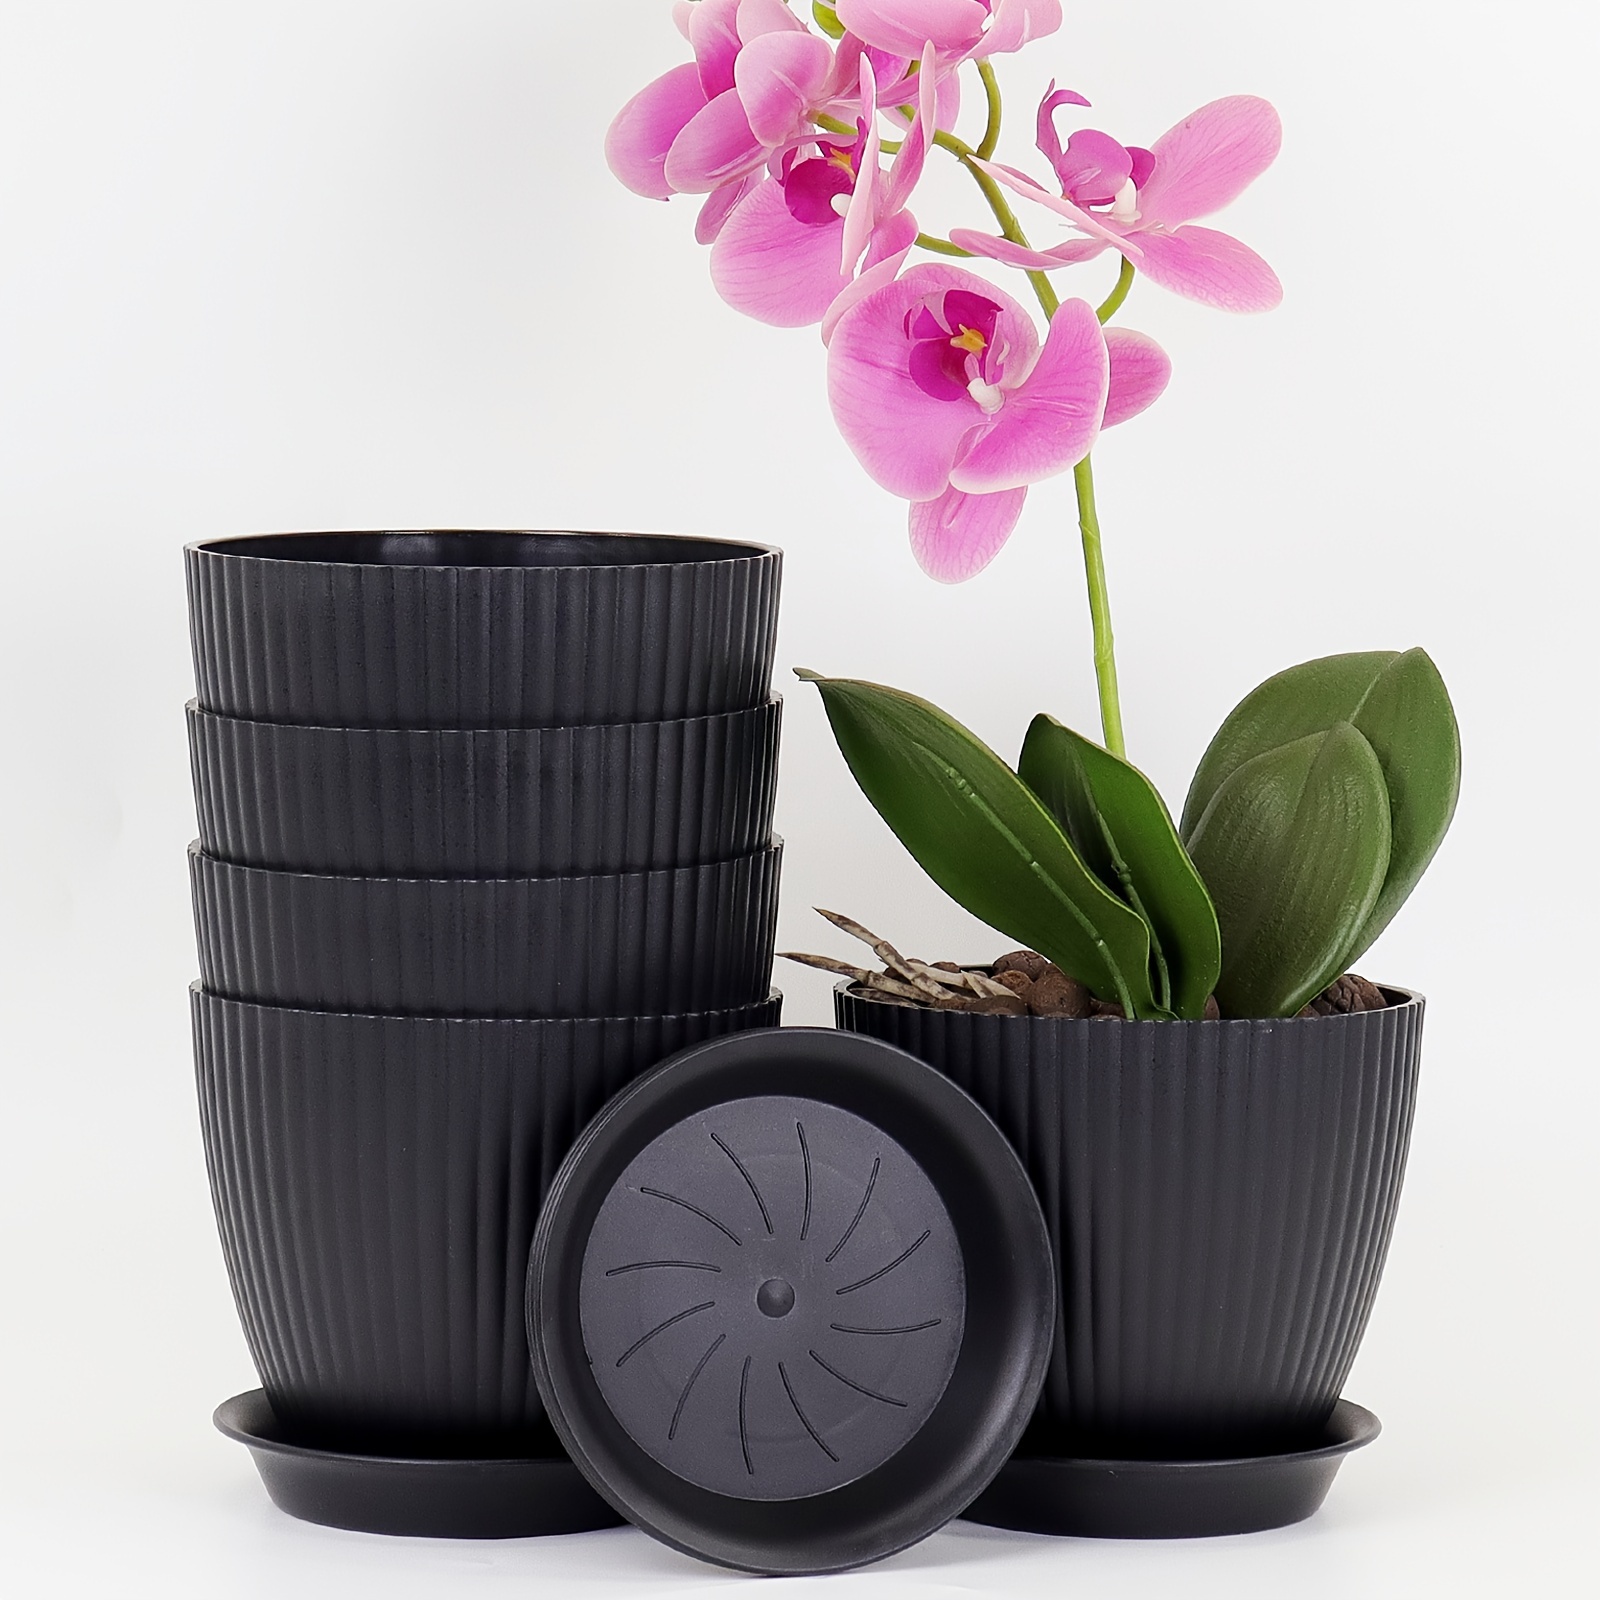 

5pcs, 7 Inch Plastic Flower Pot, Drain Hole And Saucer, Suitable For Indoor And Outdoor Plants, White, Black 2 Combination